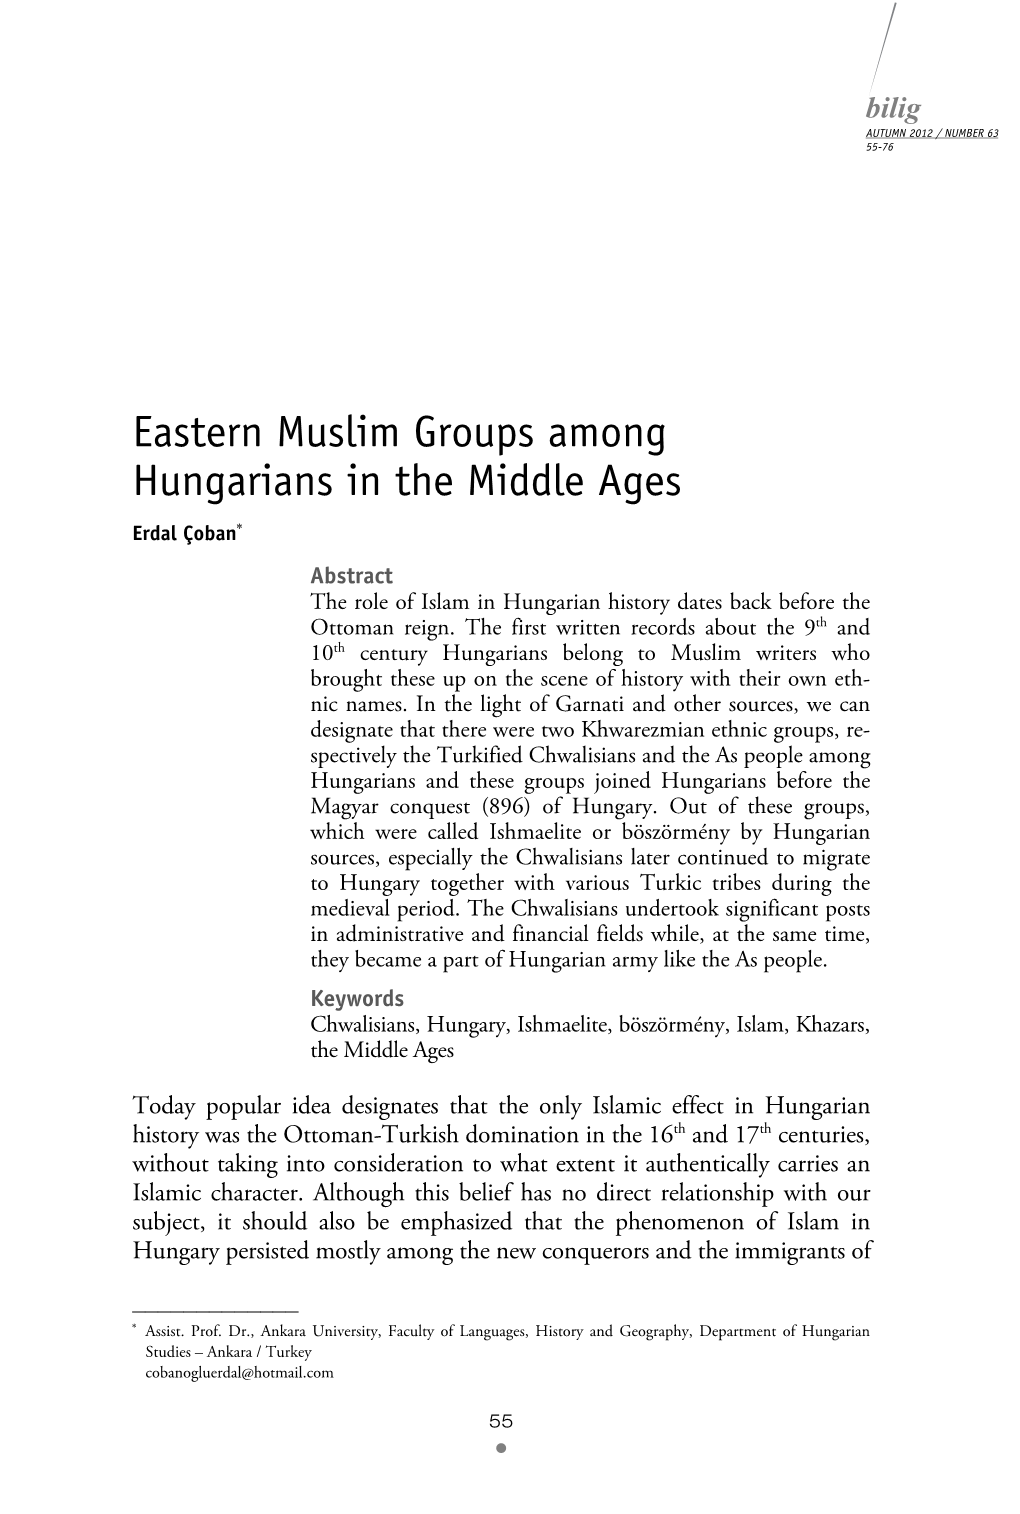 Eastern Muslim Groups Among Hungarians in the Middle Ages Erdal Çoban Abstract the Role of Islam in Hungarian History Dates Back Before the Ottoman Reign